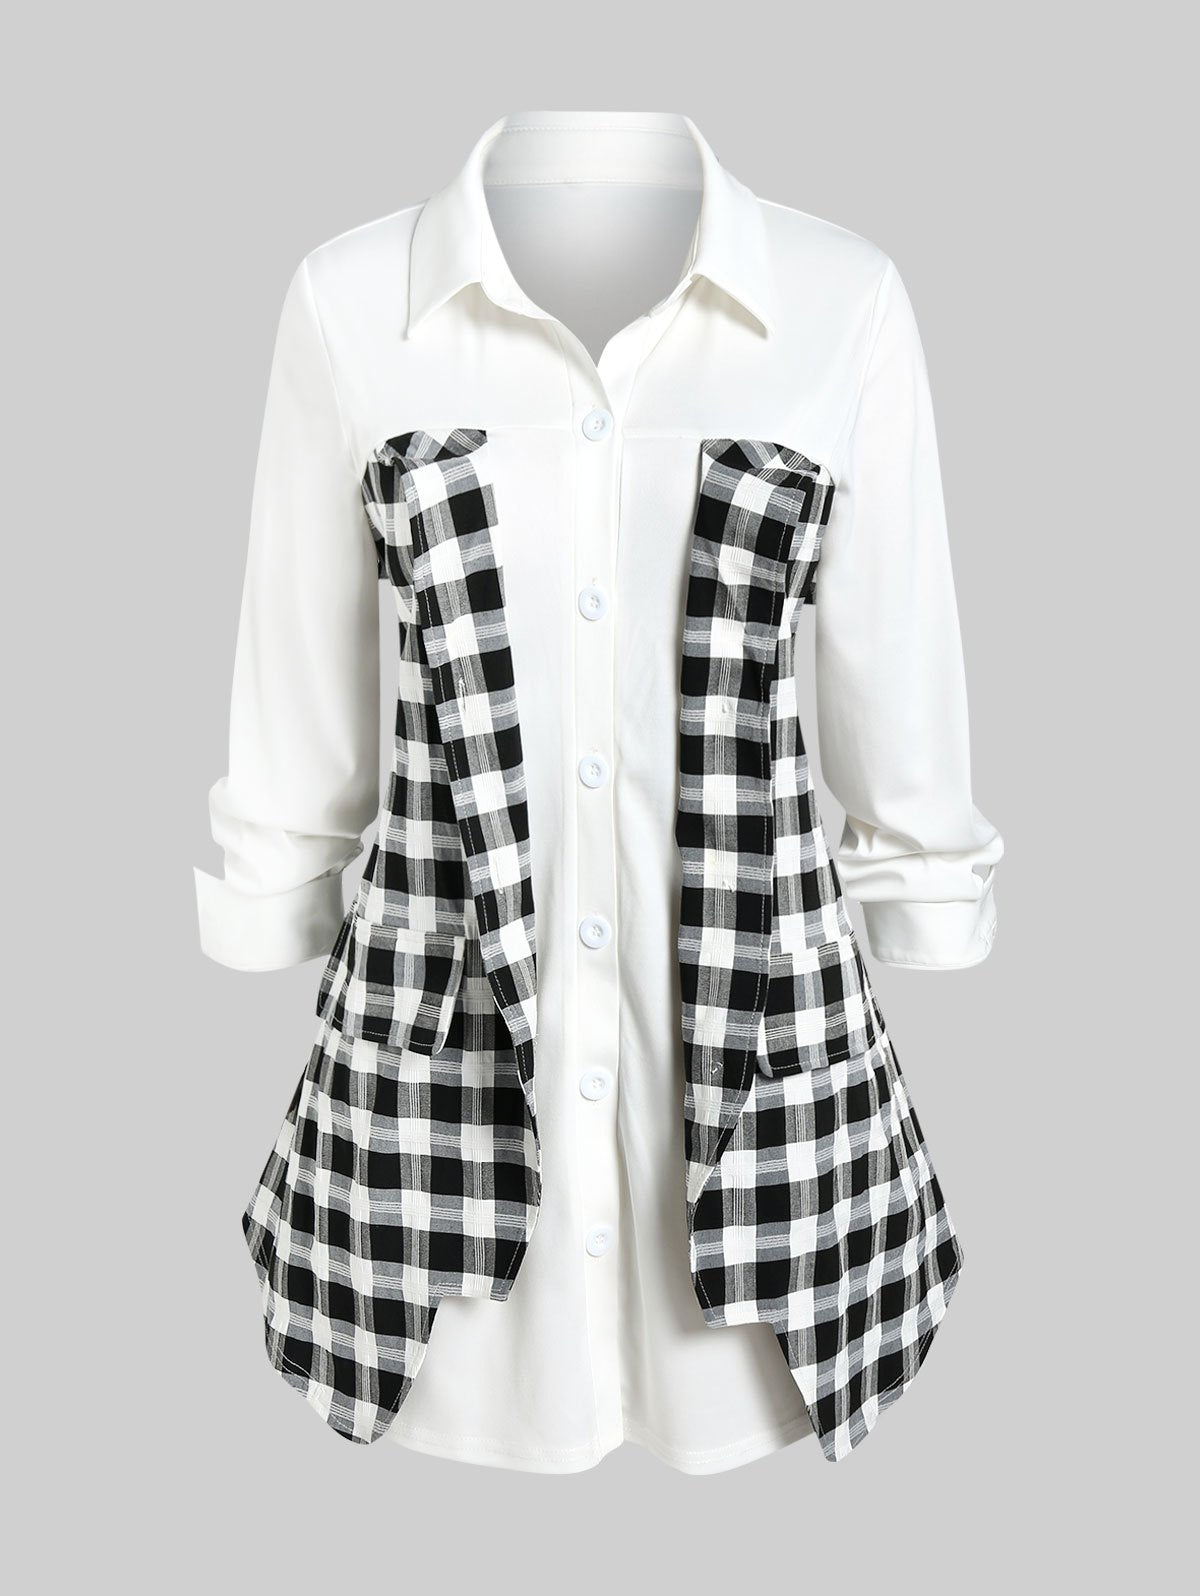 Plus Size Womens Gingham Chic Long Sleeve Layered Shirt - Soft Slight Stretch Fabric, Casual Comfortable Top for Daily Wear, Versatile Styling Options - Perfect for Spring and Summer